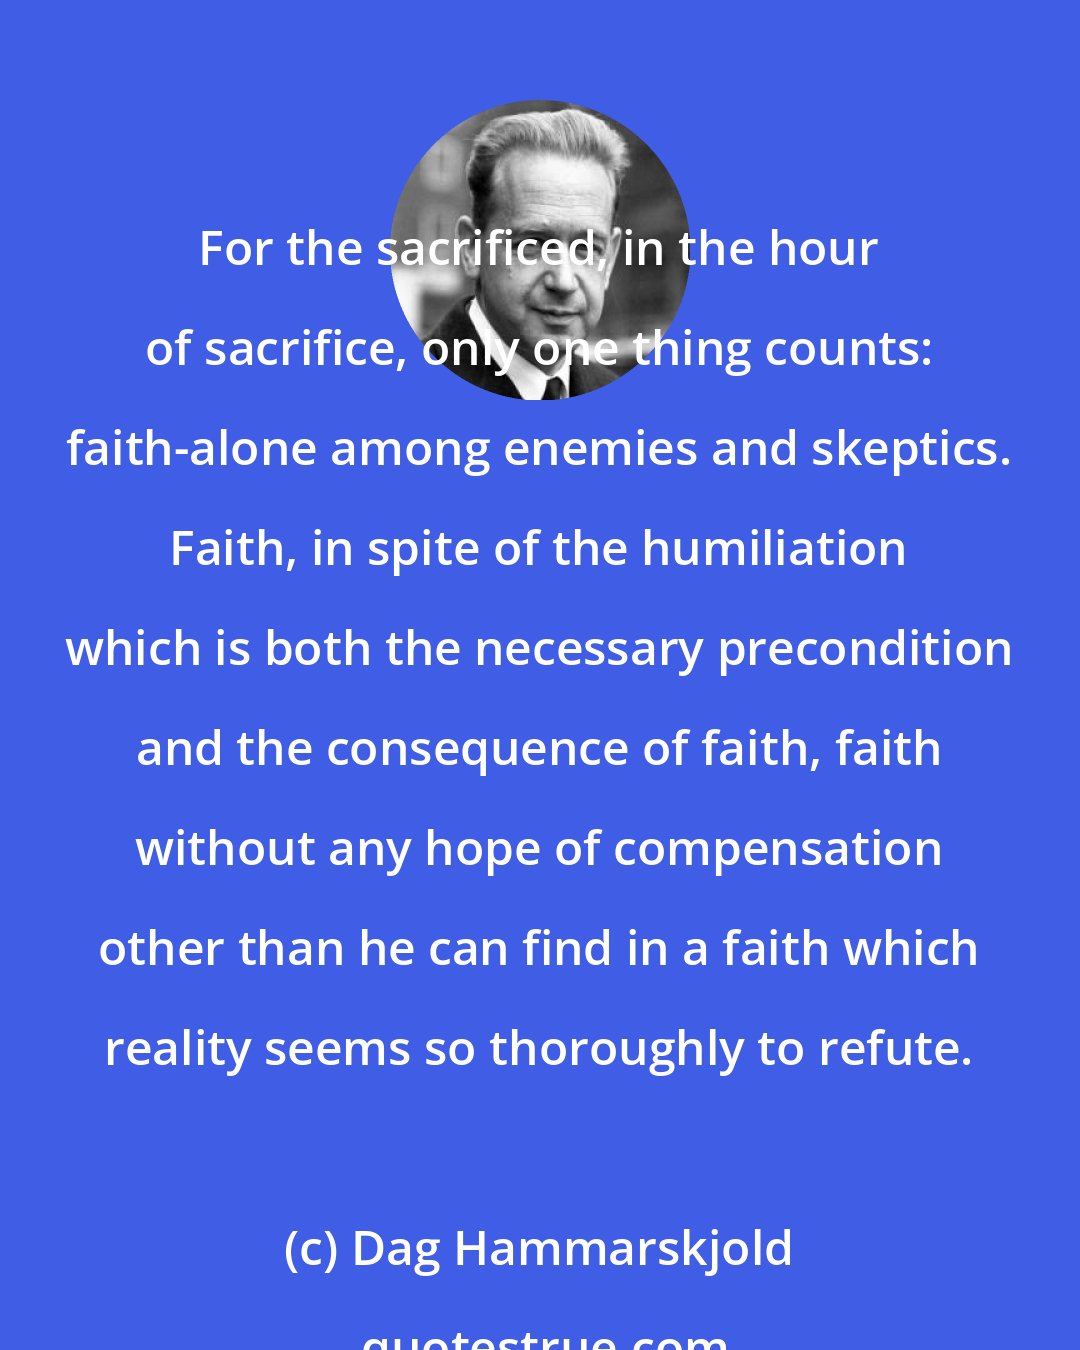 Dag Hammarskjold: For the sacrificed, in the hour of sacrifice, only one thing counts: faith-alone among enemies and skeptics. Faith, in spite of the humiliation which is both the necessary precondition and the consequence of faith, faith without any hope of compensation other than he can find in a faith which reality seems so thoroughly to refute.